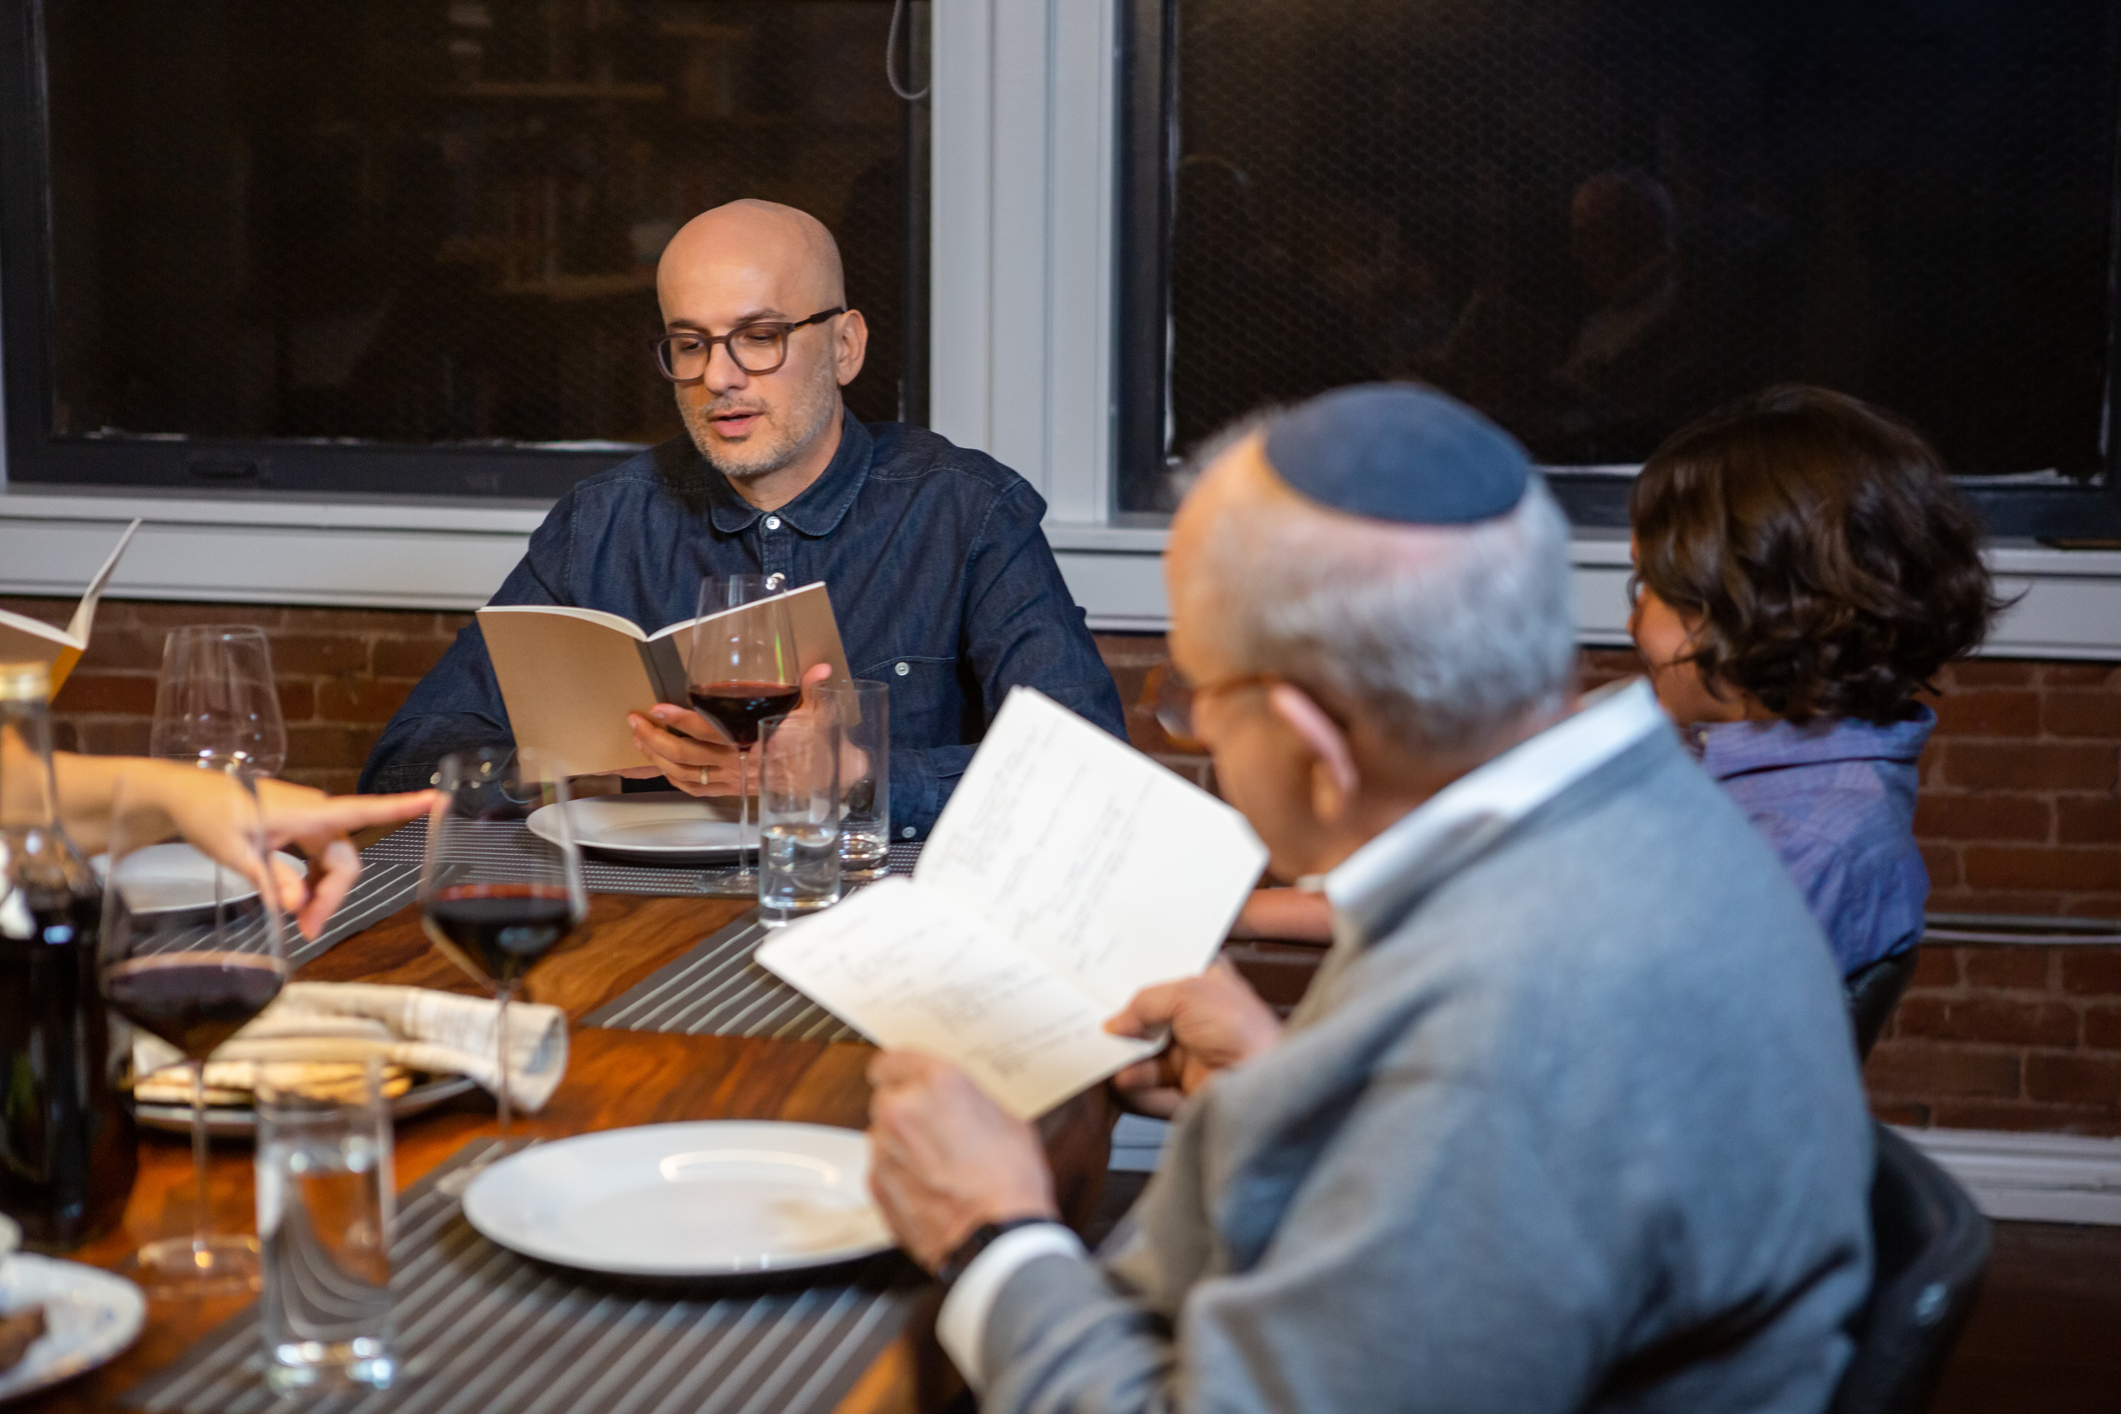 A modern Jewish American family celebrates Passover together, with the seder leader reading from the Haggadah, the text that sets forth the order of the Seder and the story of the Exodus.